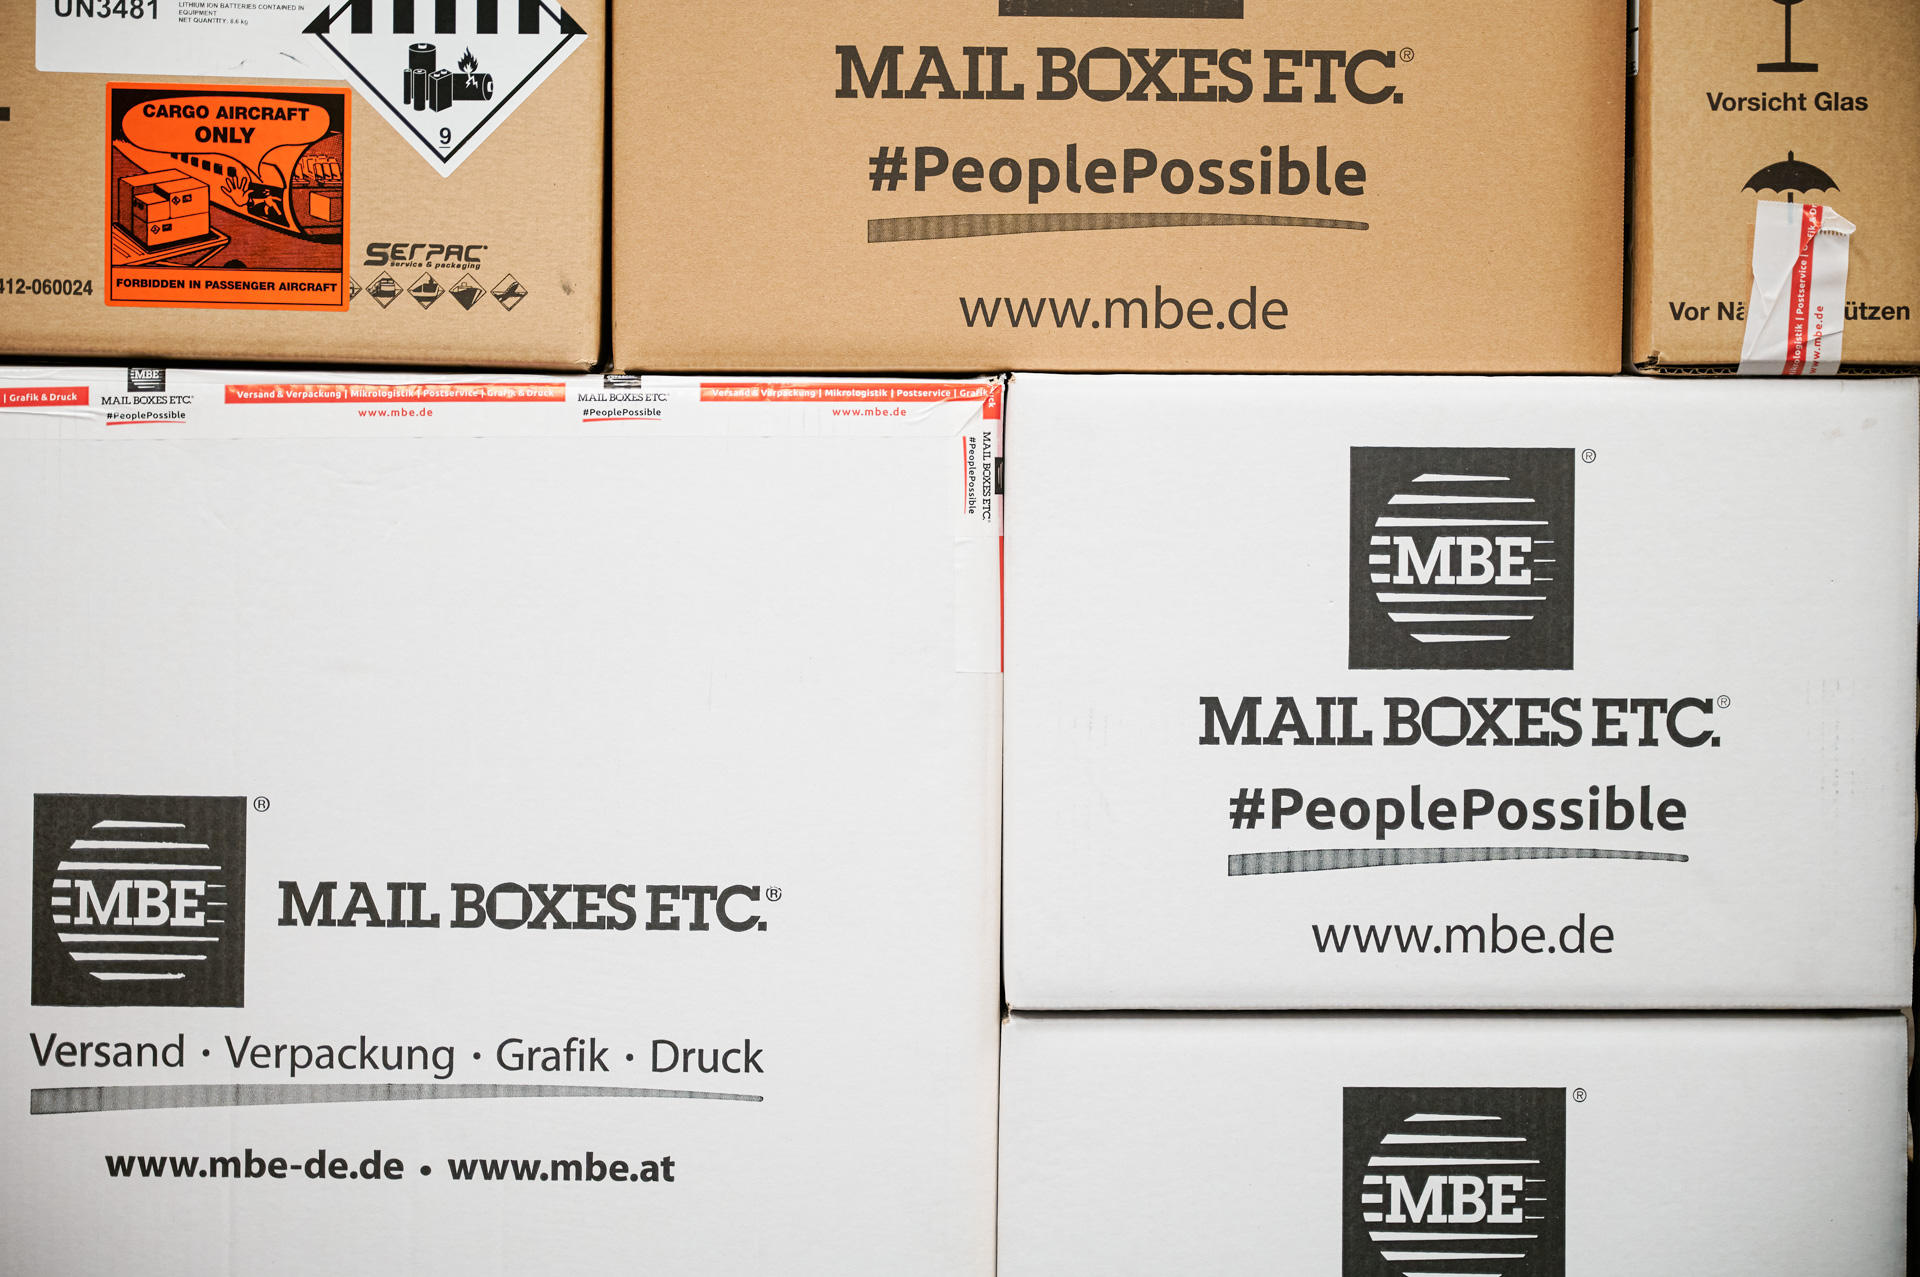 Mail Boxes Etc. - Center MBE 2605